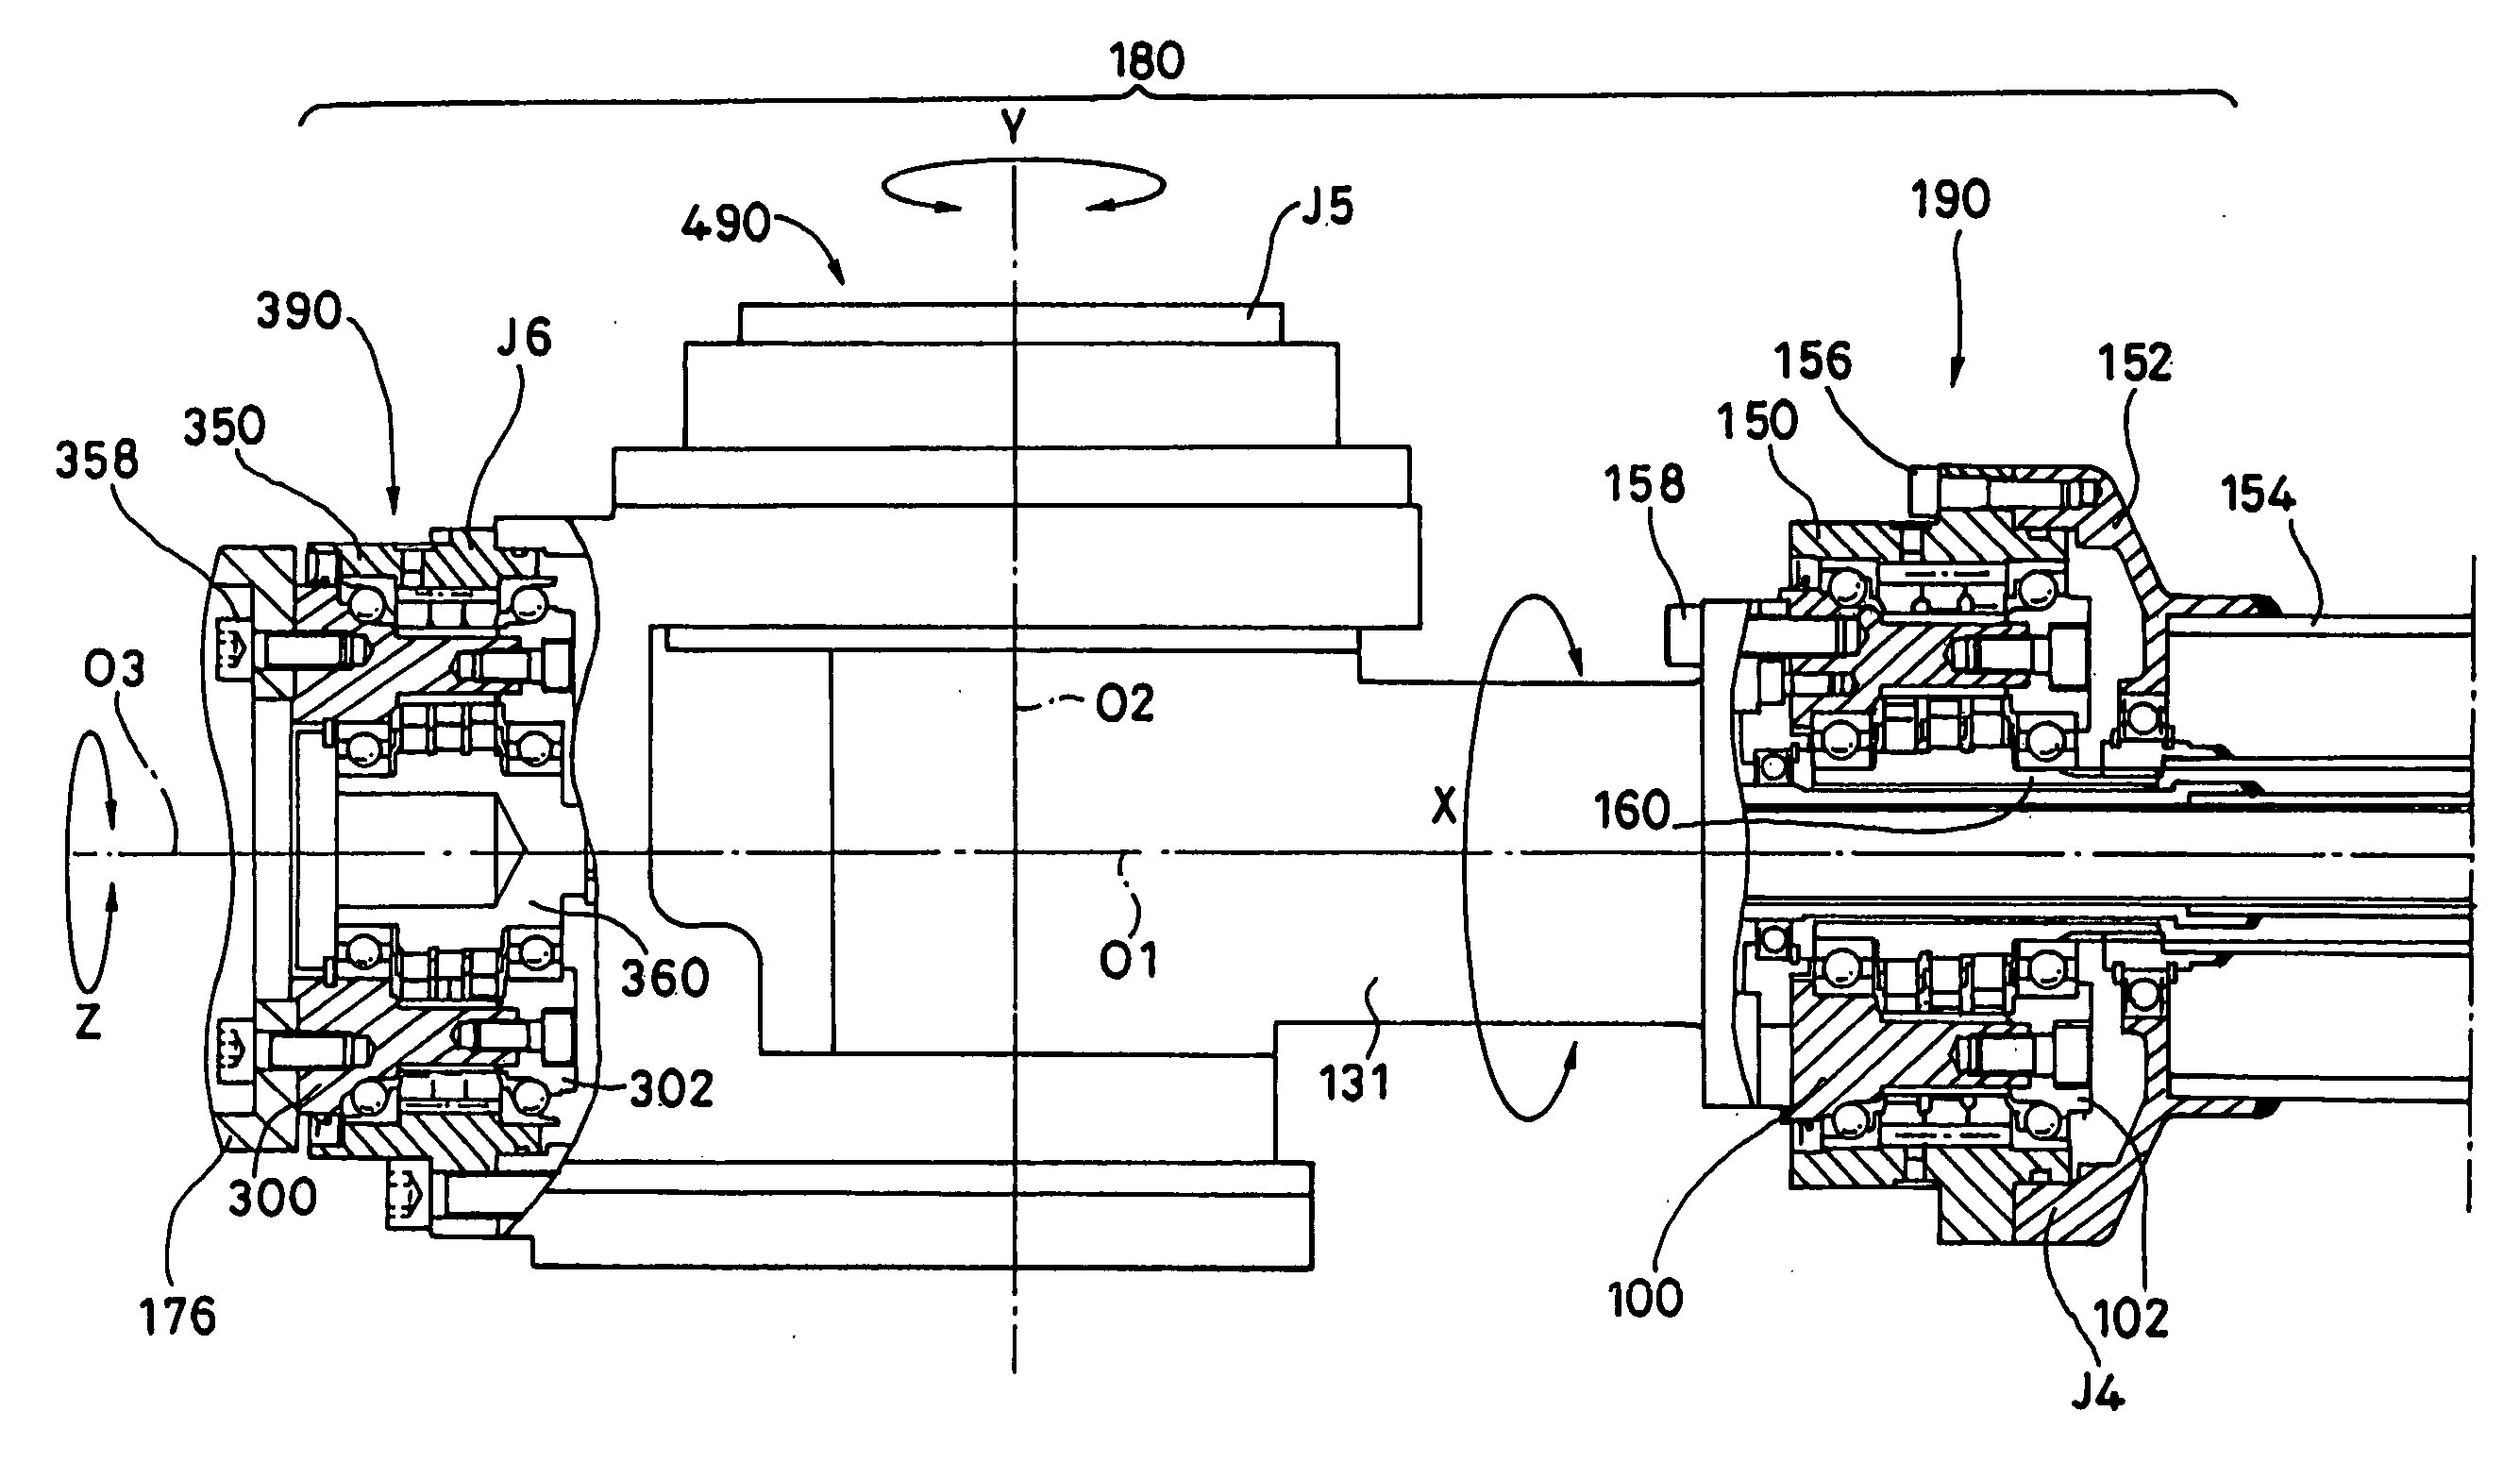 Power transmission device for driving robot wrist and power transmission device